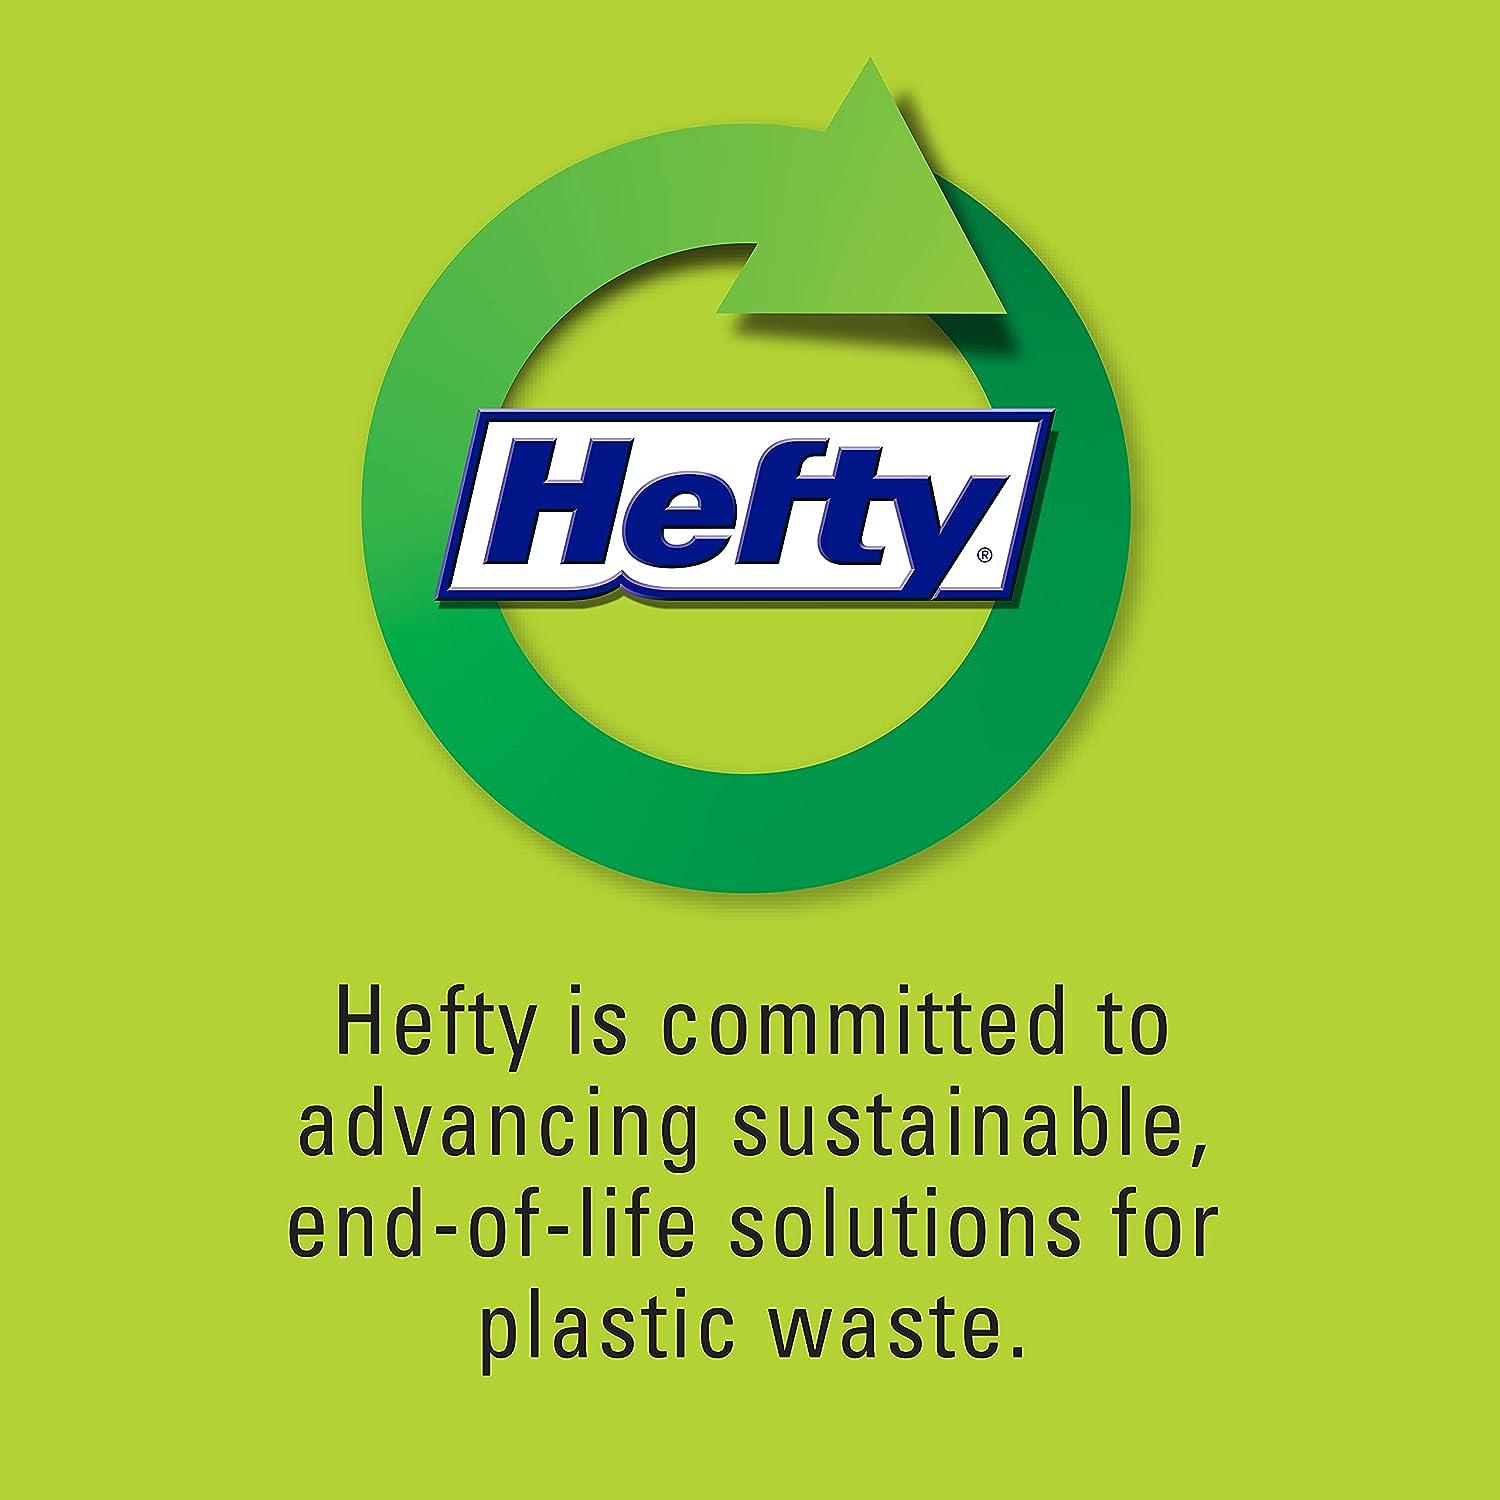 Hefty Ultra Strong Tall Kitchen Trash Bags, Blackout, Clean Burst, 13 Gallon,  80 Count